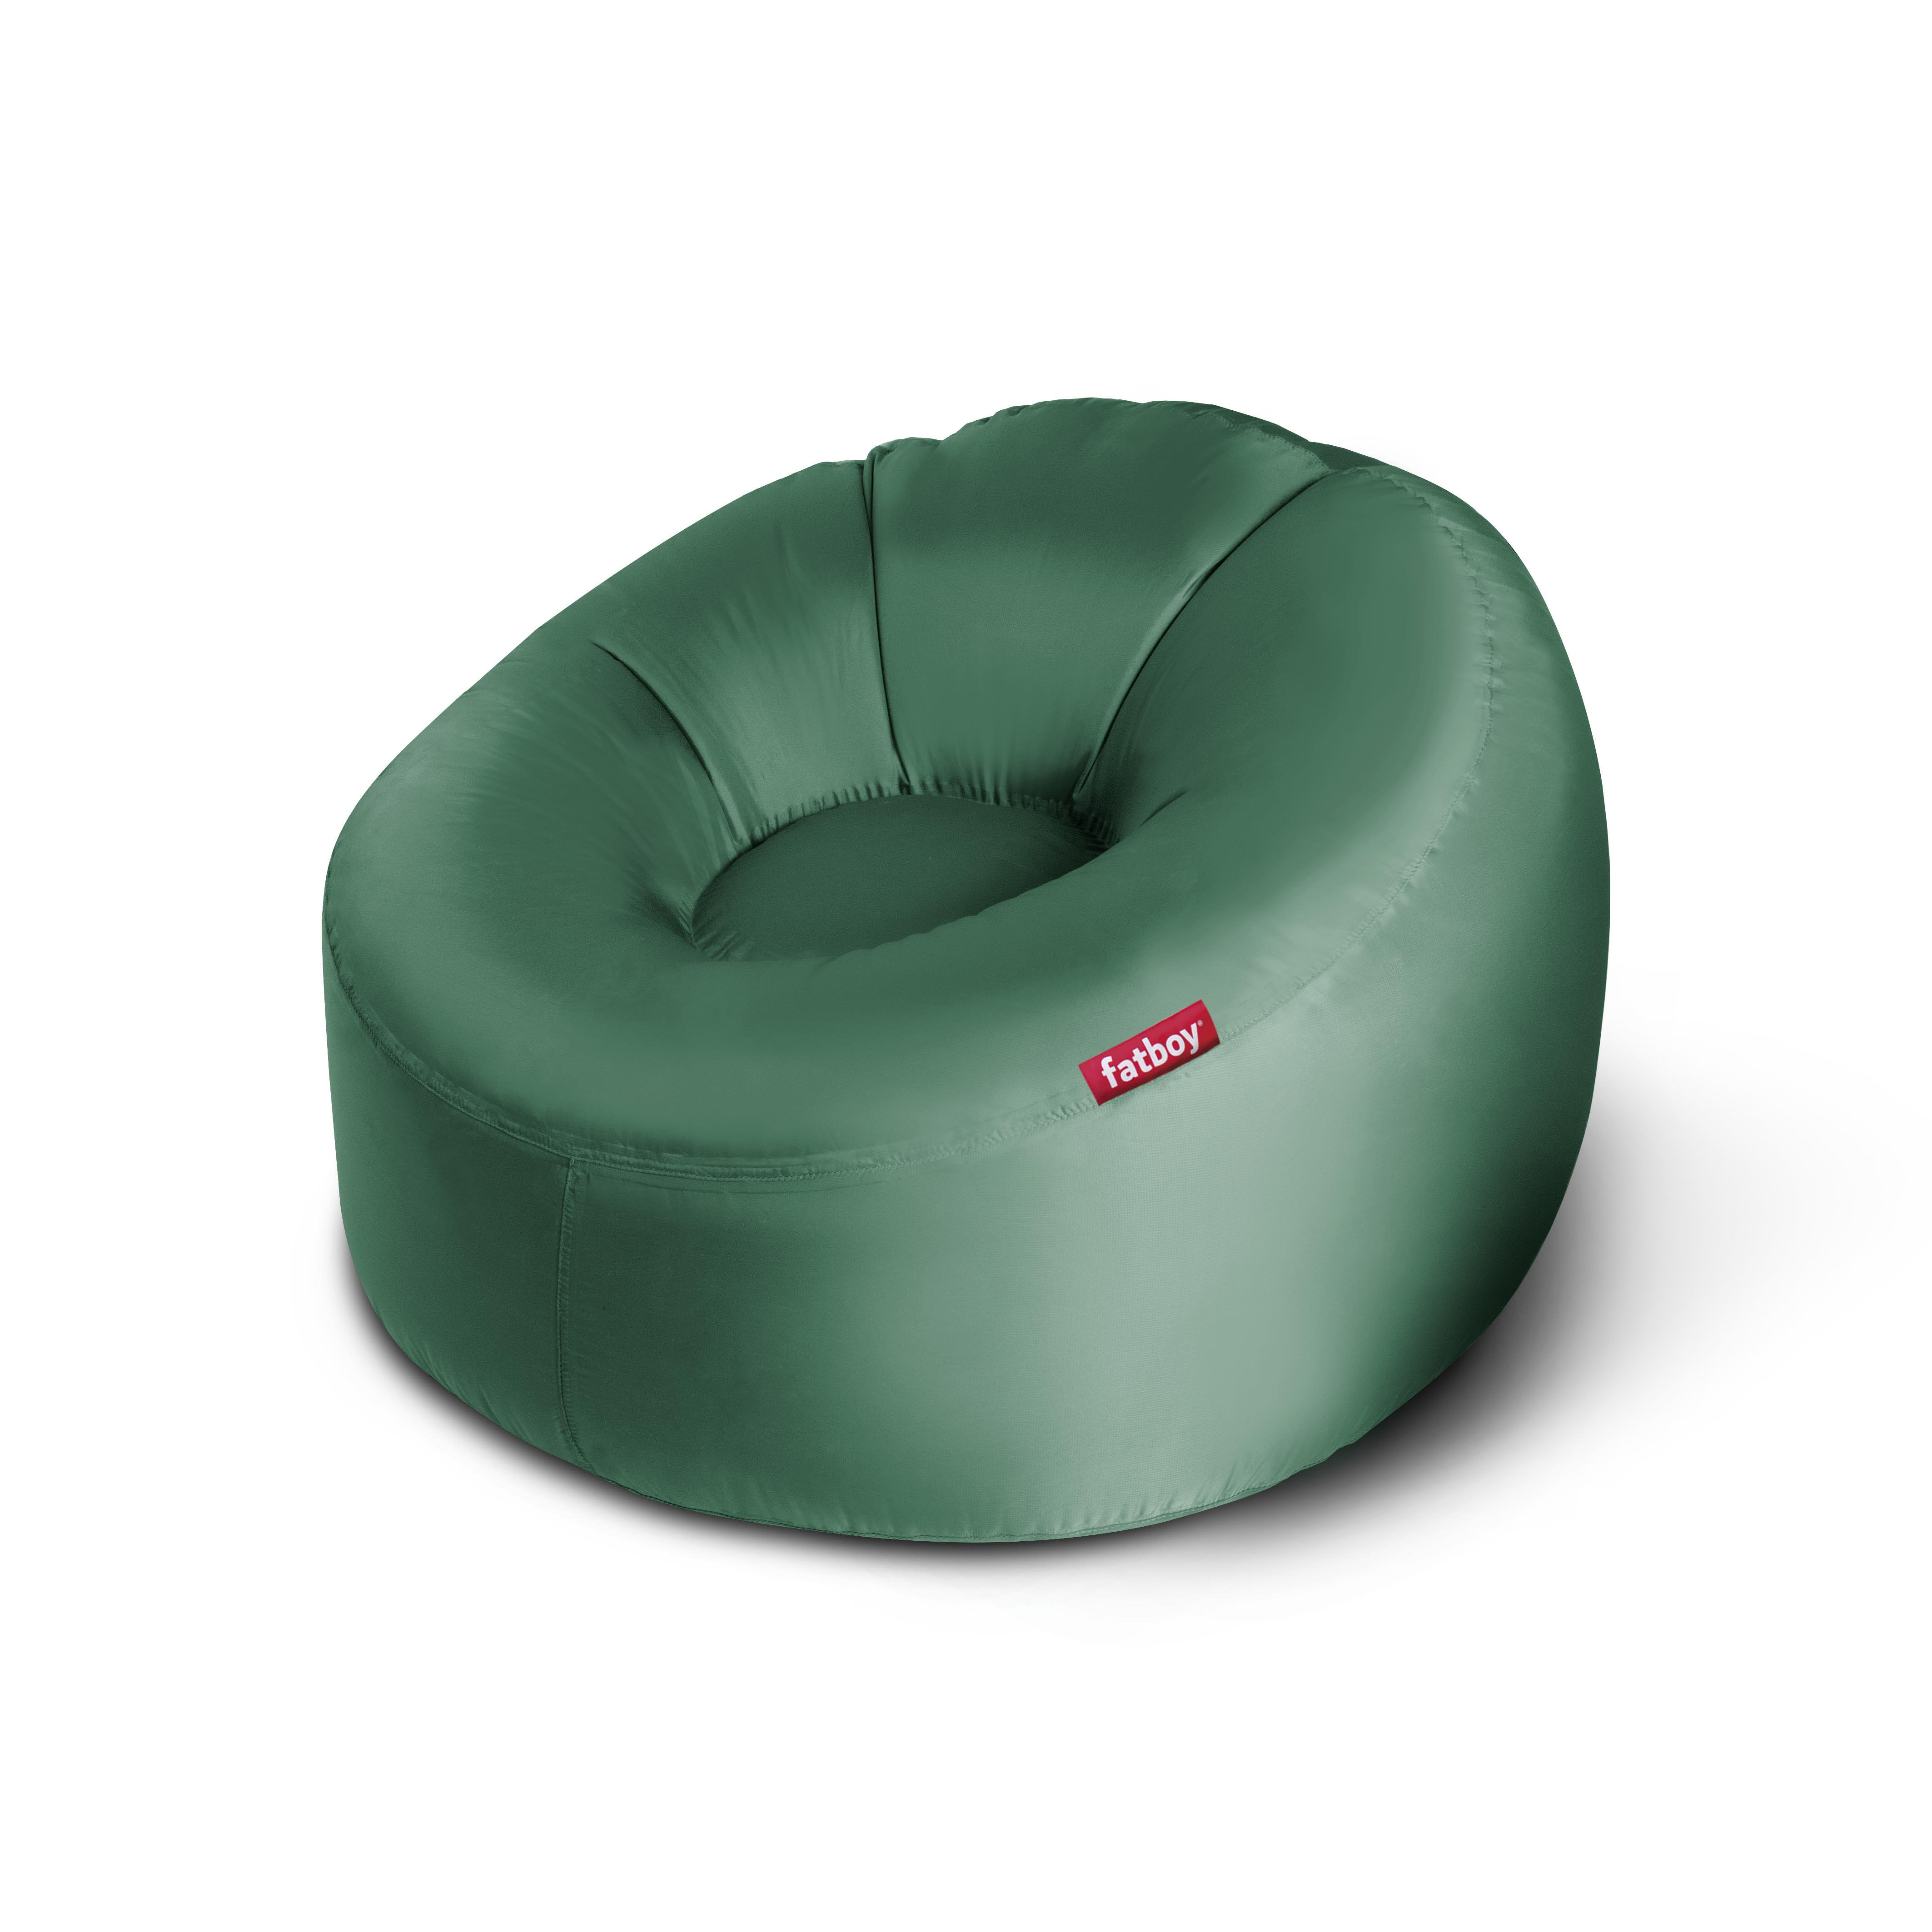 Fauteuil Gonflable  Siège, chaise & pouf gonflable